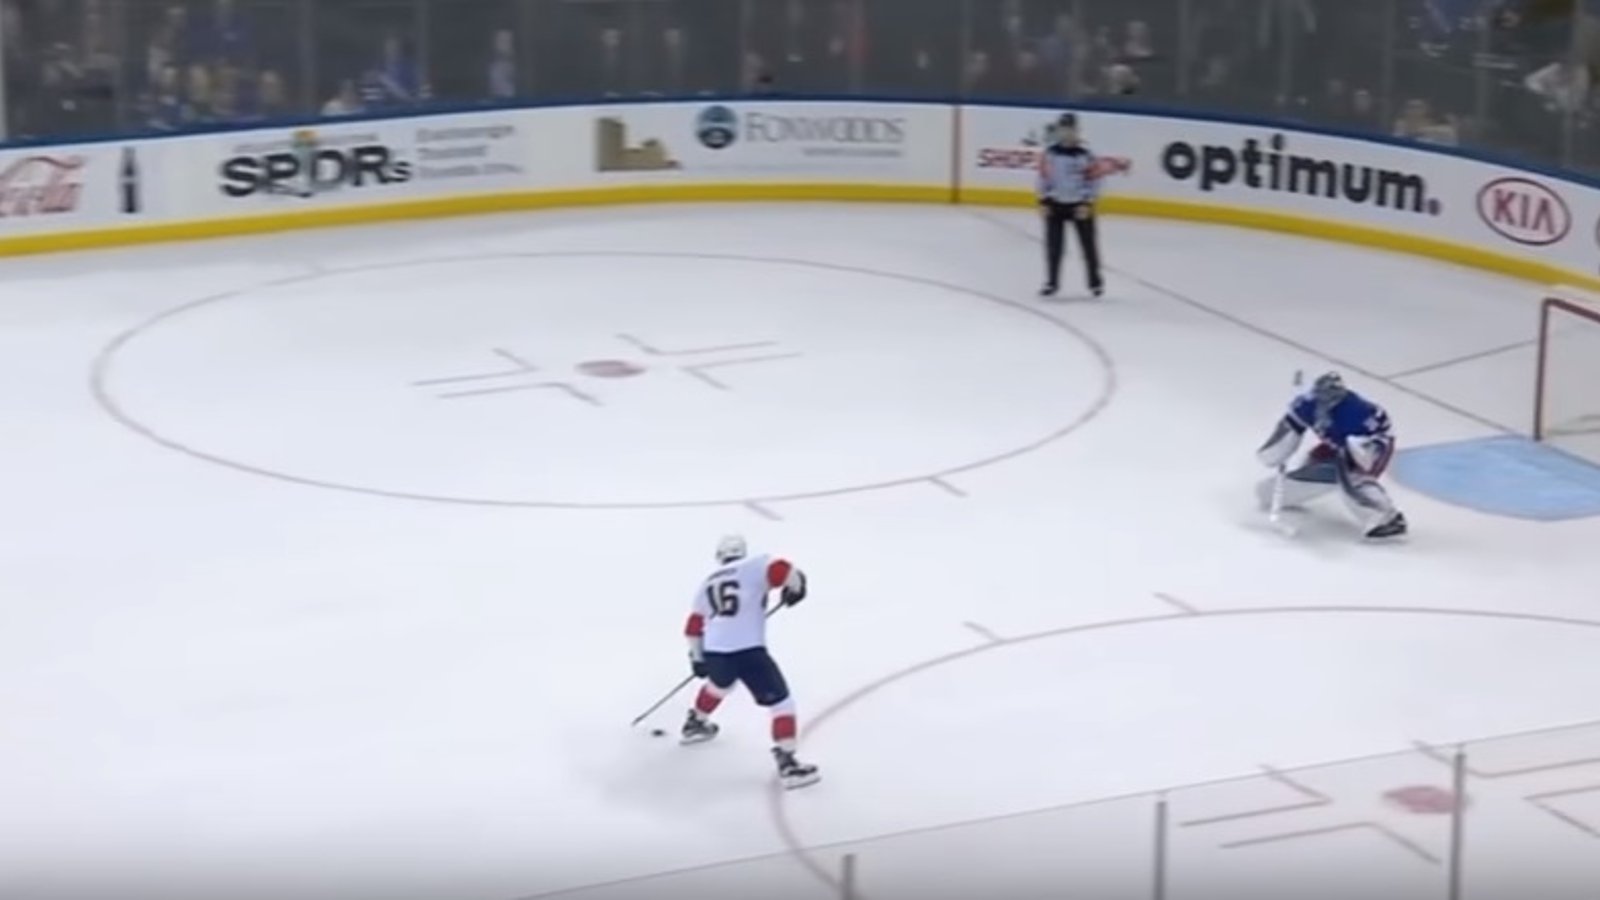 Must See: This Aleksander Barkov shootout compilation is insane